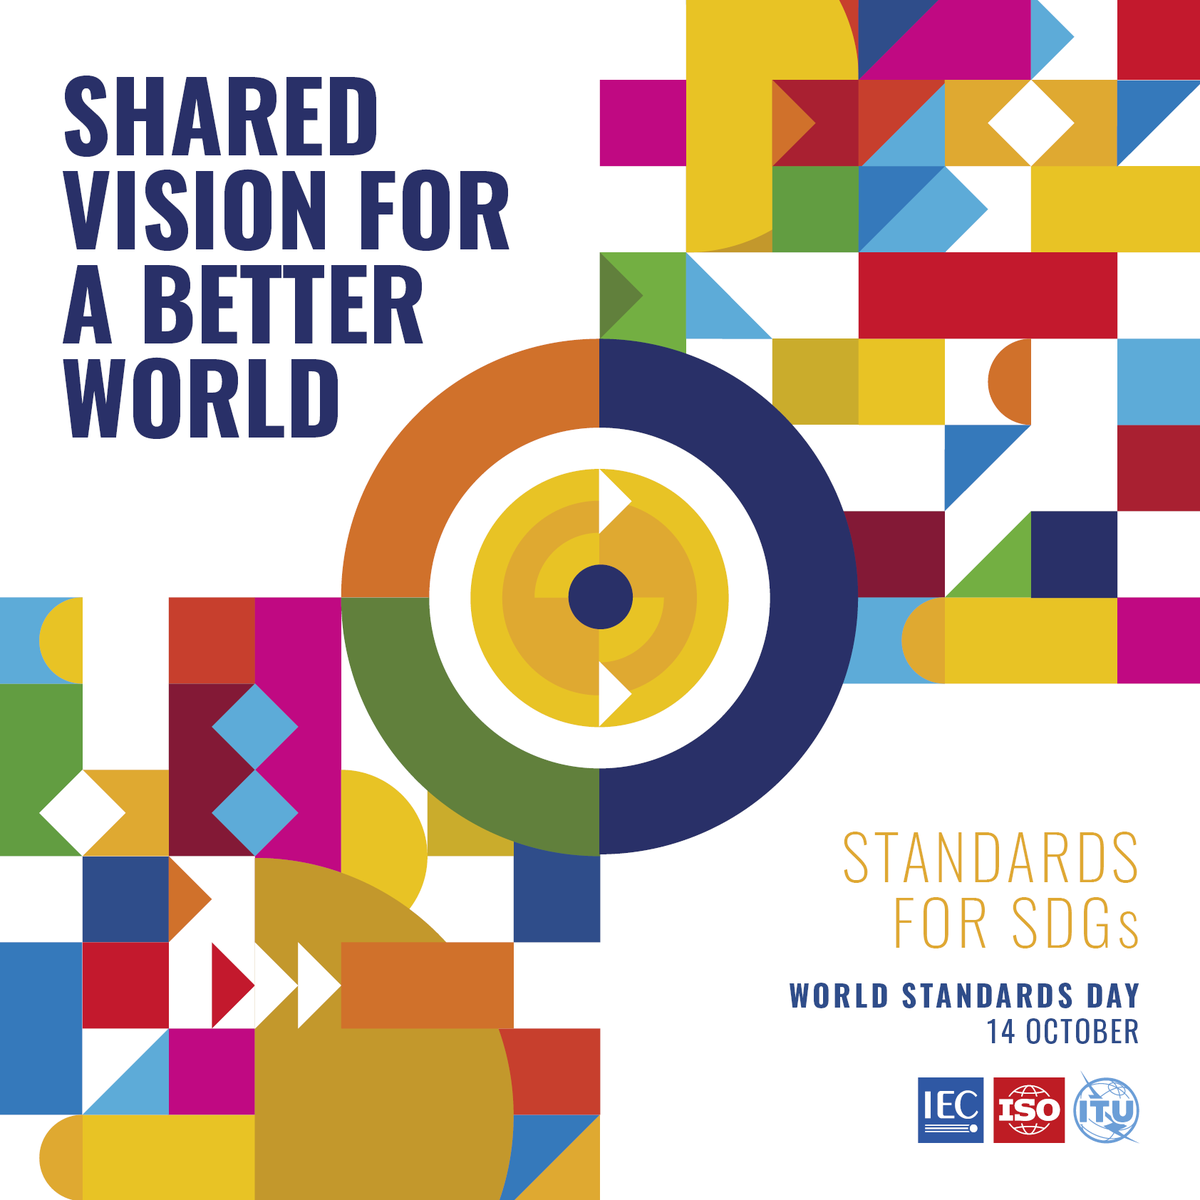 It’s #WorldStandardsDay and we want to work towards a better world that is #Fairer and more #Sustainable, so it can be enjoyed today and also protected for future generations to come. Together, we can make this vision a #Reality! @IECStandards @isostandards @ITU